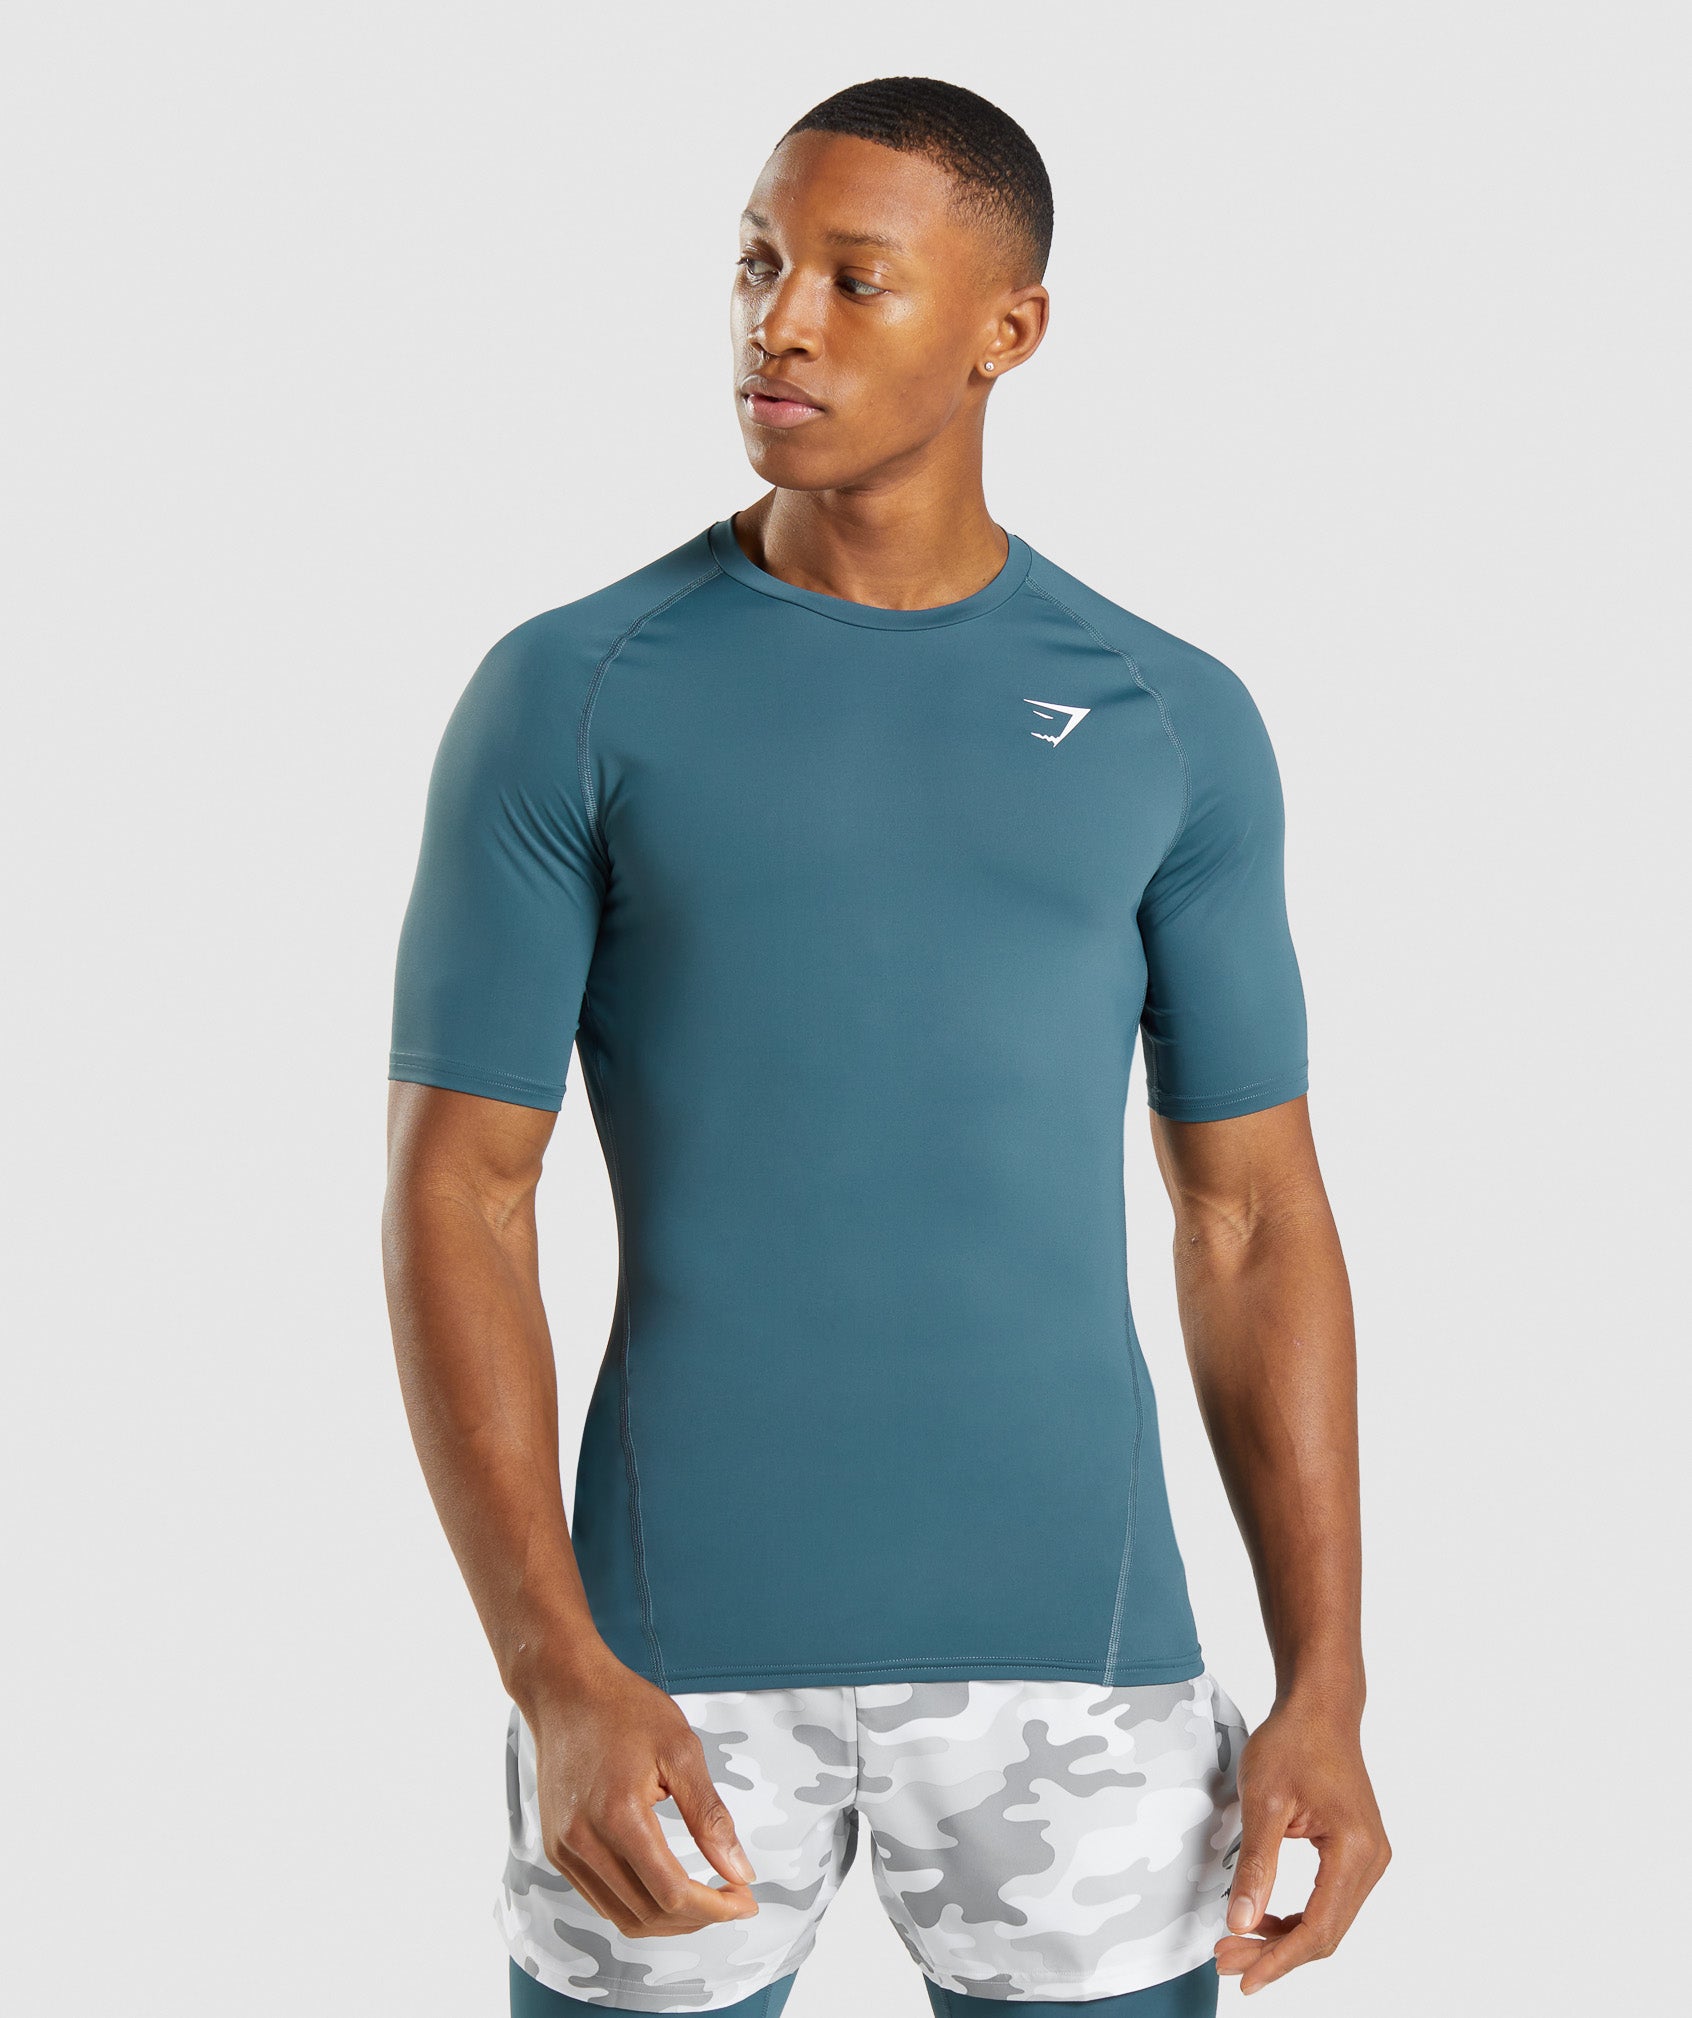 Element Baselayer T-Shirt in Tuscan Teal - view 1